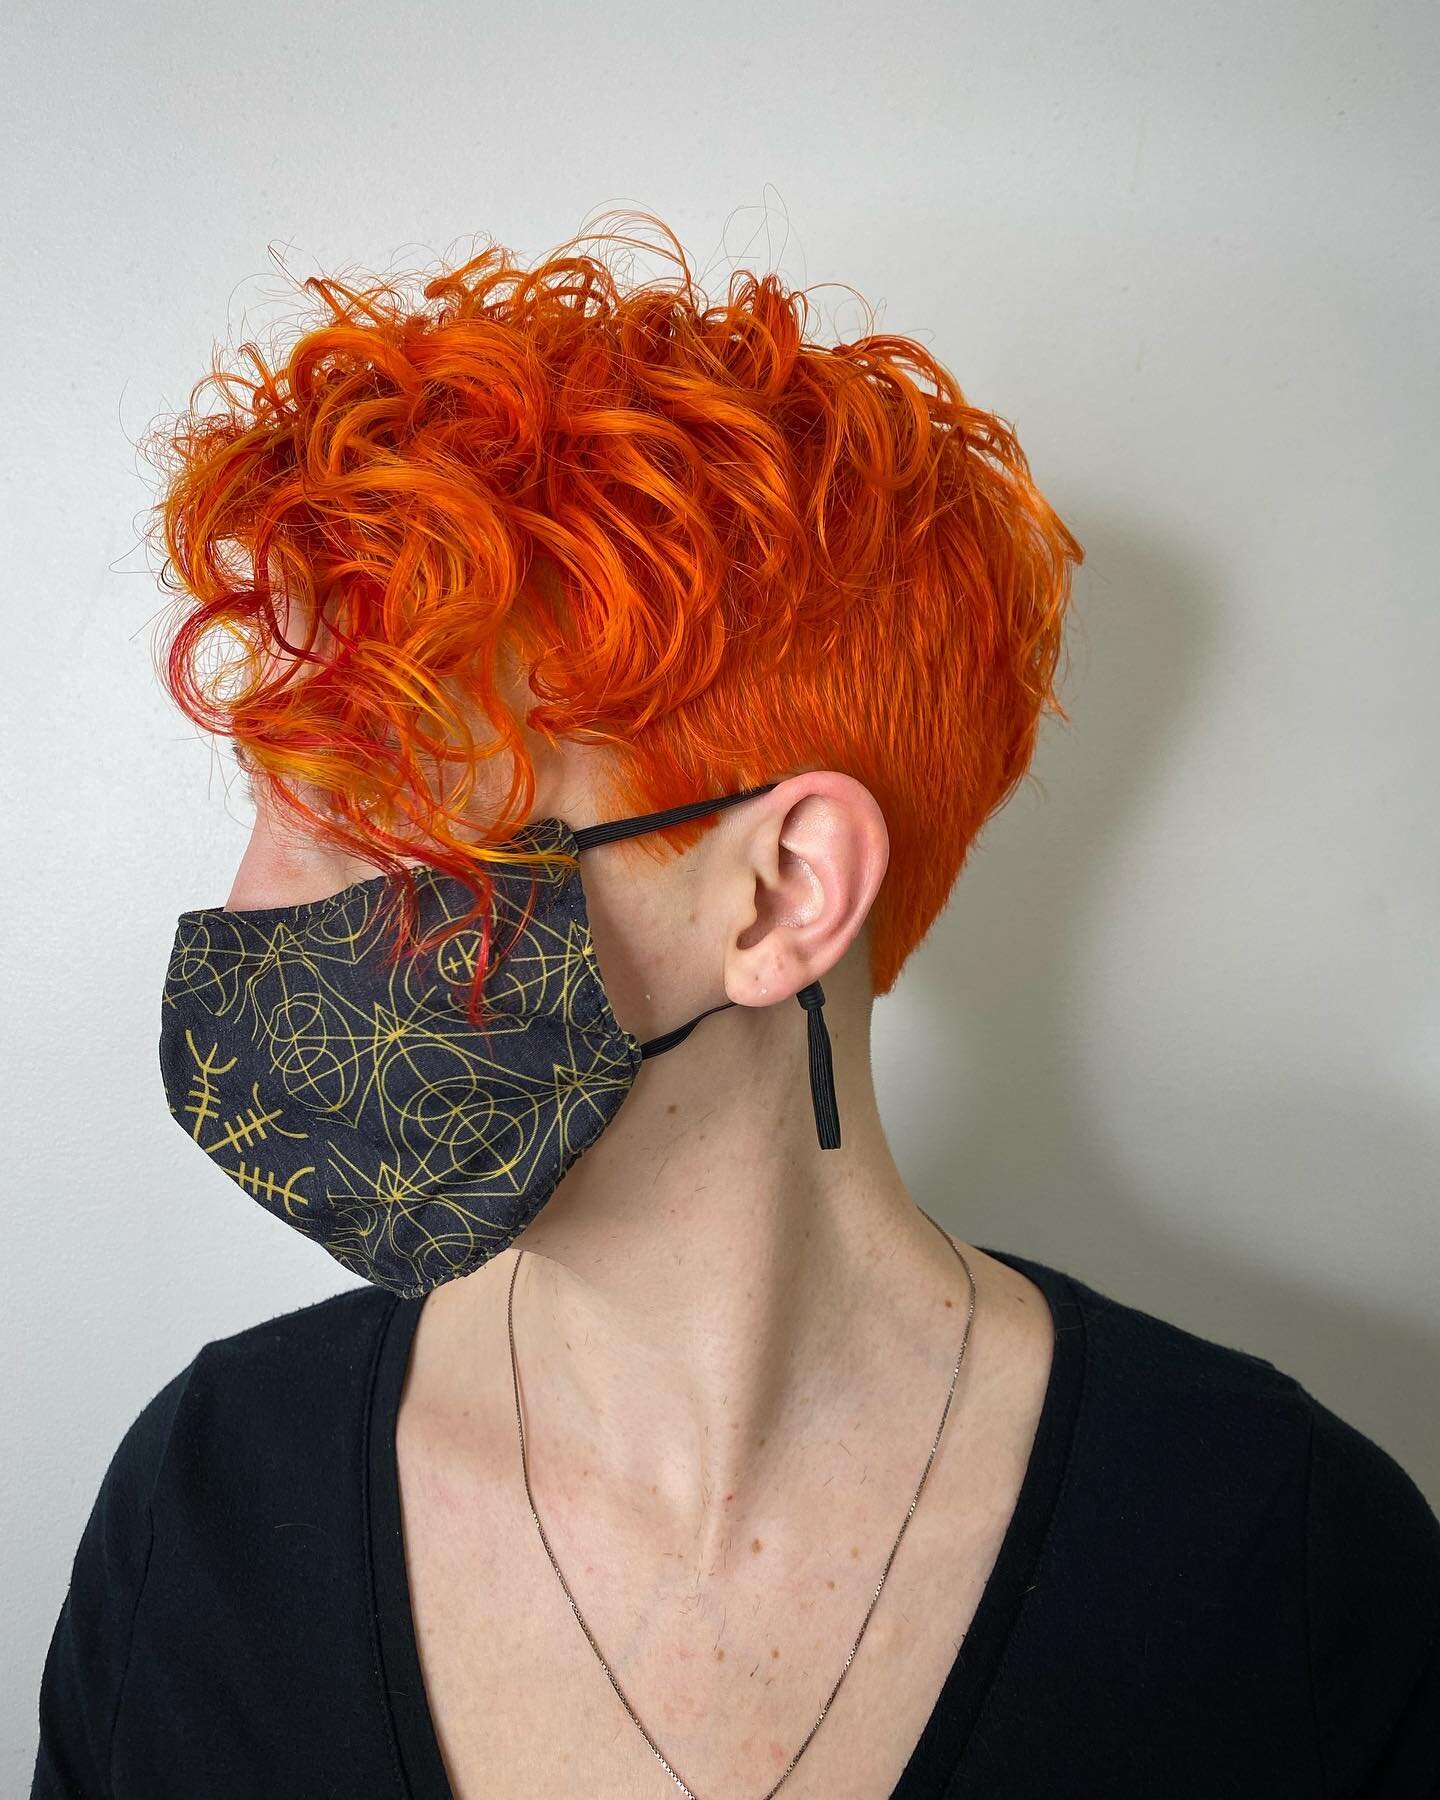 Dimensional orange created by @tiffanyshuck using #pravanavivids and styled with #cultandking Pomade and Balm.
.
#seattlesalon #seattle #haresalon #orangehair #shorthaircut #shorthair #naturalhaircare #nontoxichaircare #curlyhair #shortcurlyhair #cur